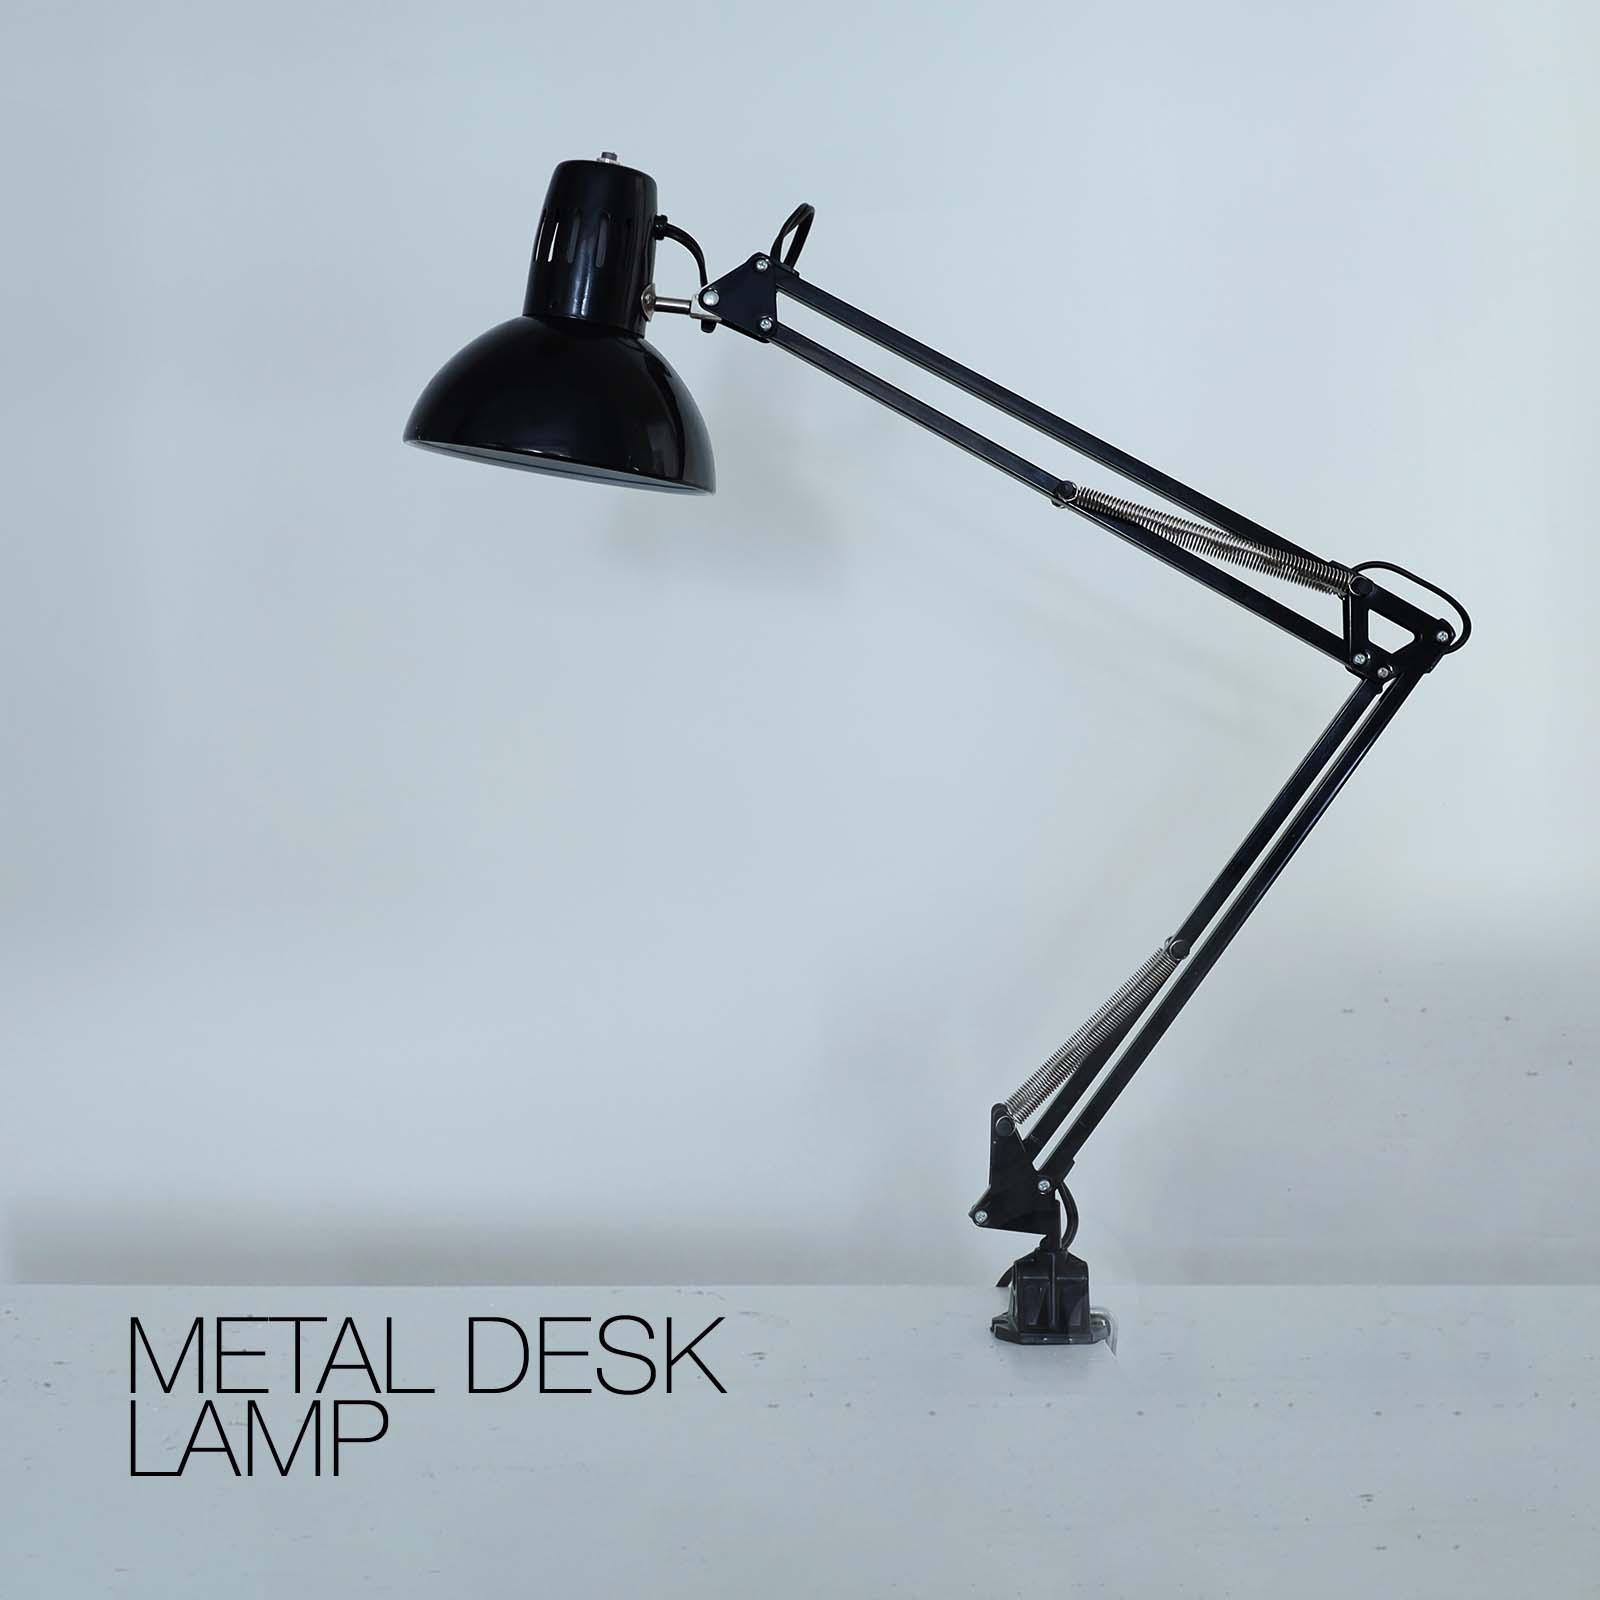 I Built a Reverb Tank out of an Old Lamp: Metal Desk Lamp￼